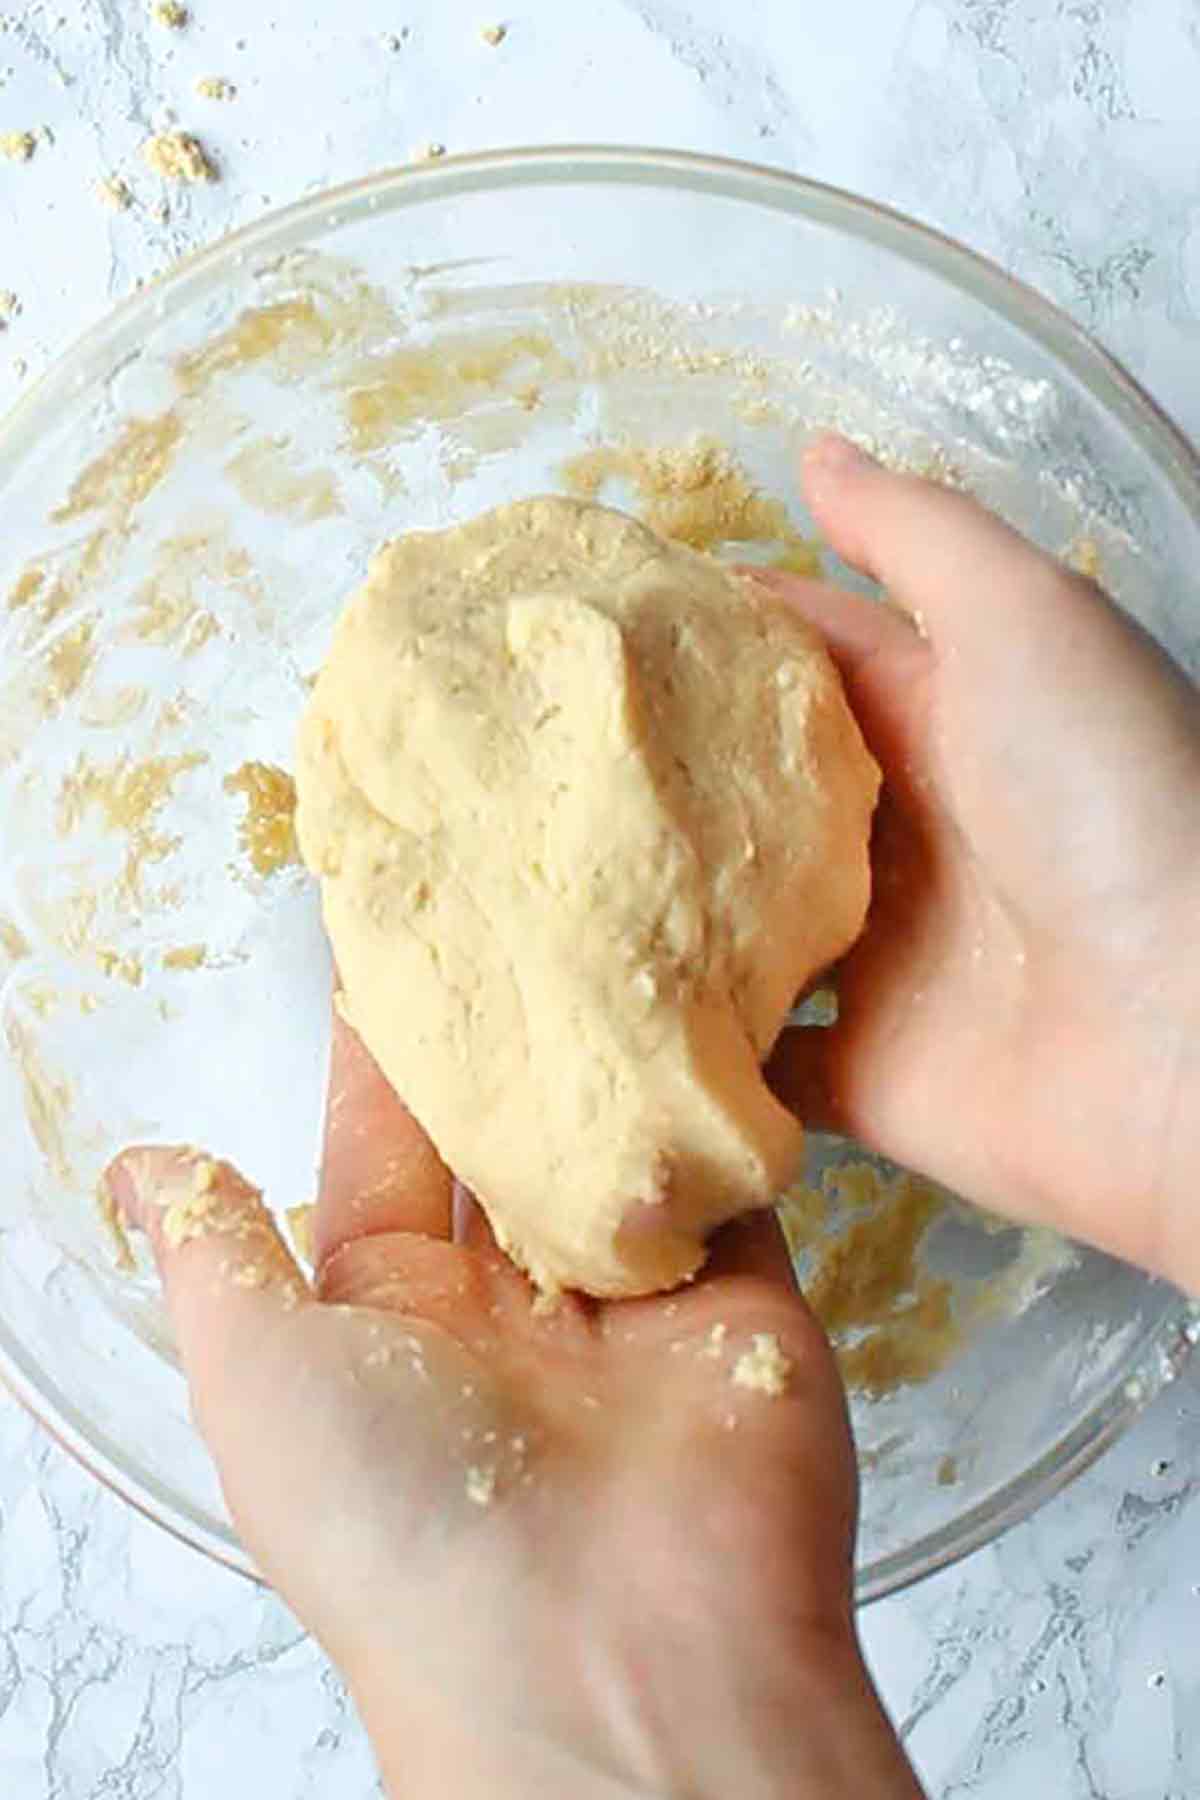 A Ball Of Biscuit Dough